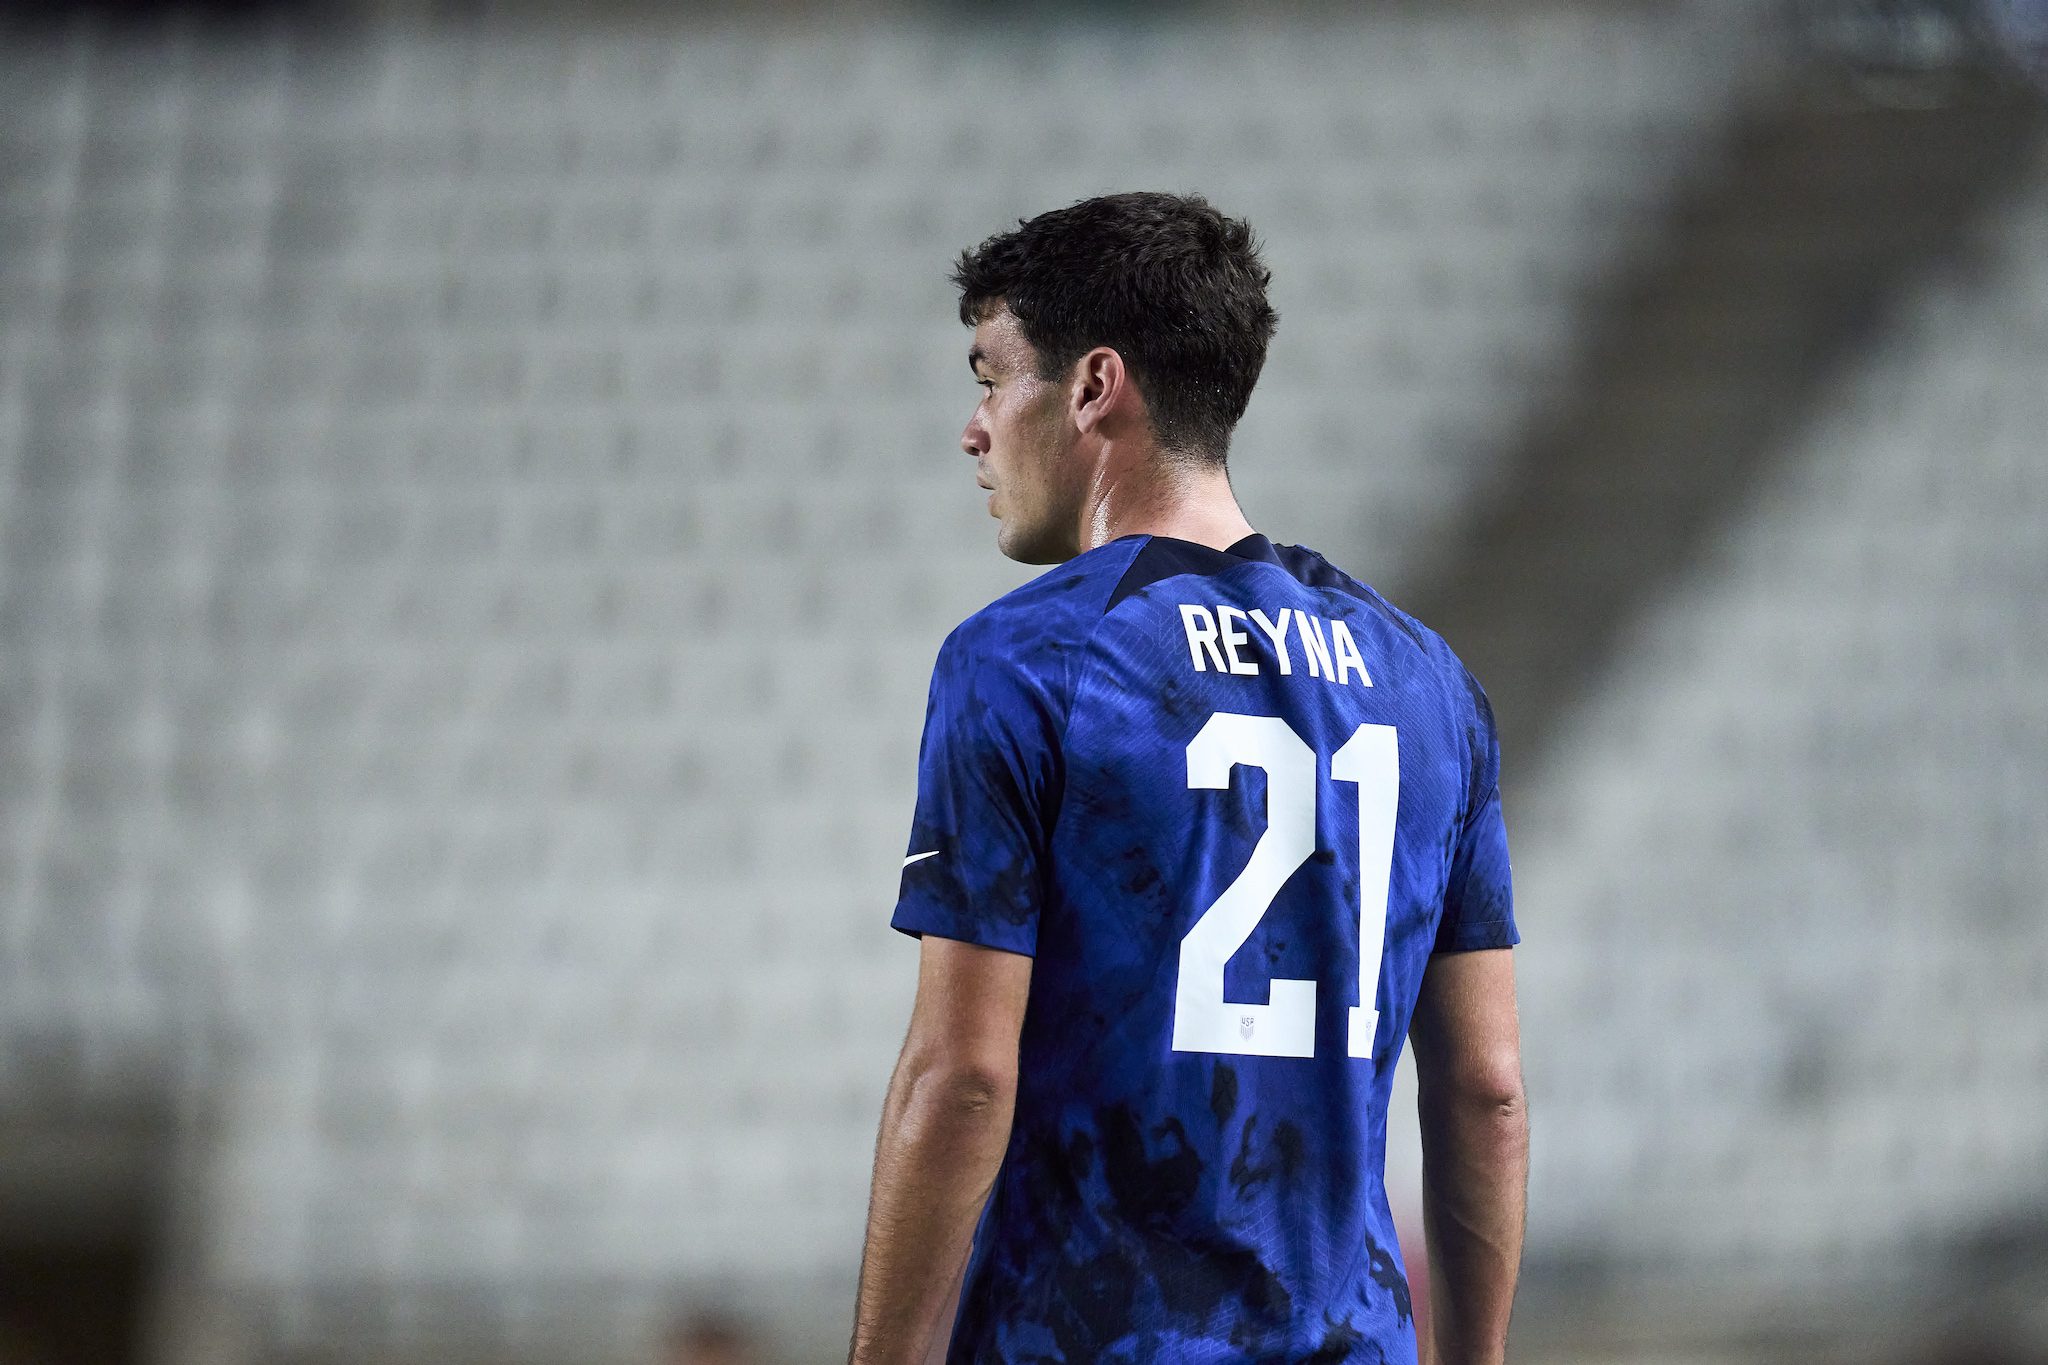 Gio Raina, star of the US national team in Qatar, is the youngest of the 32 present